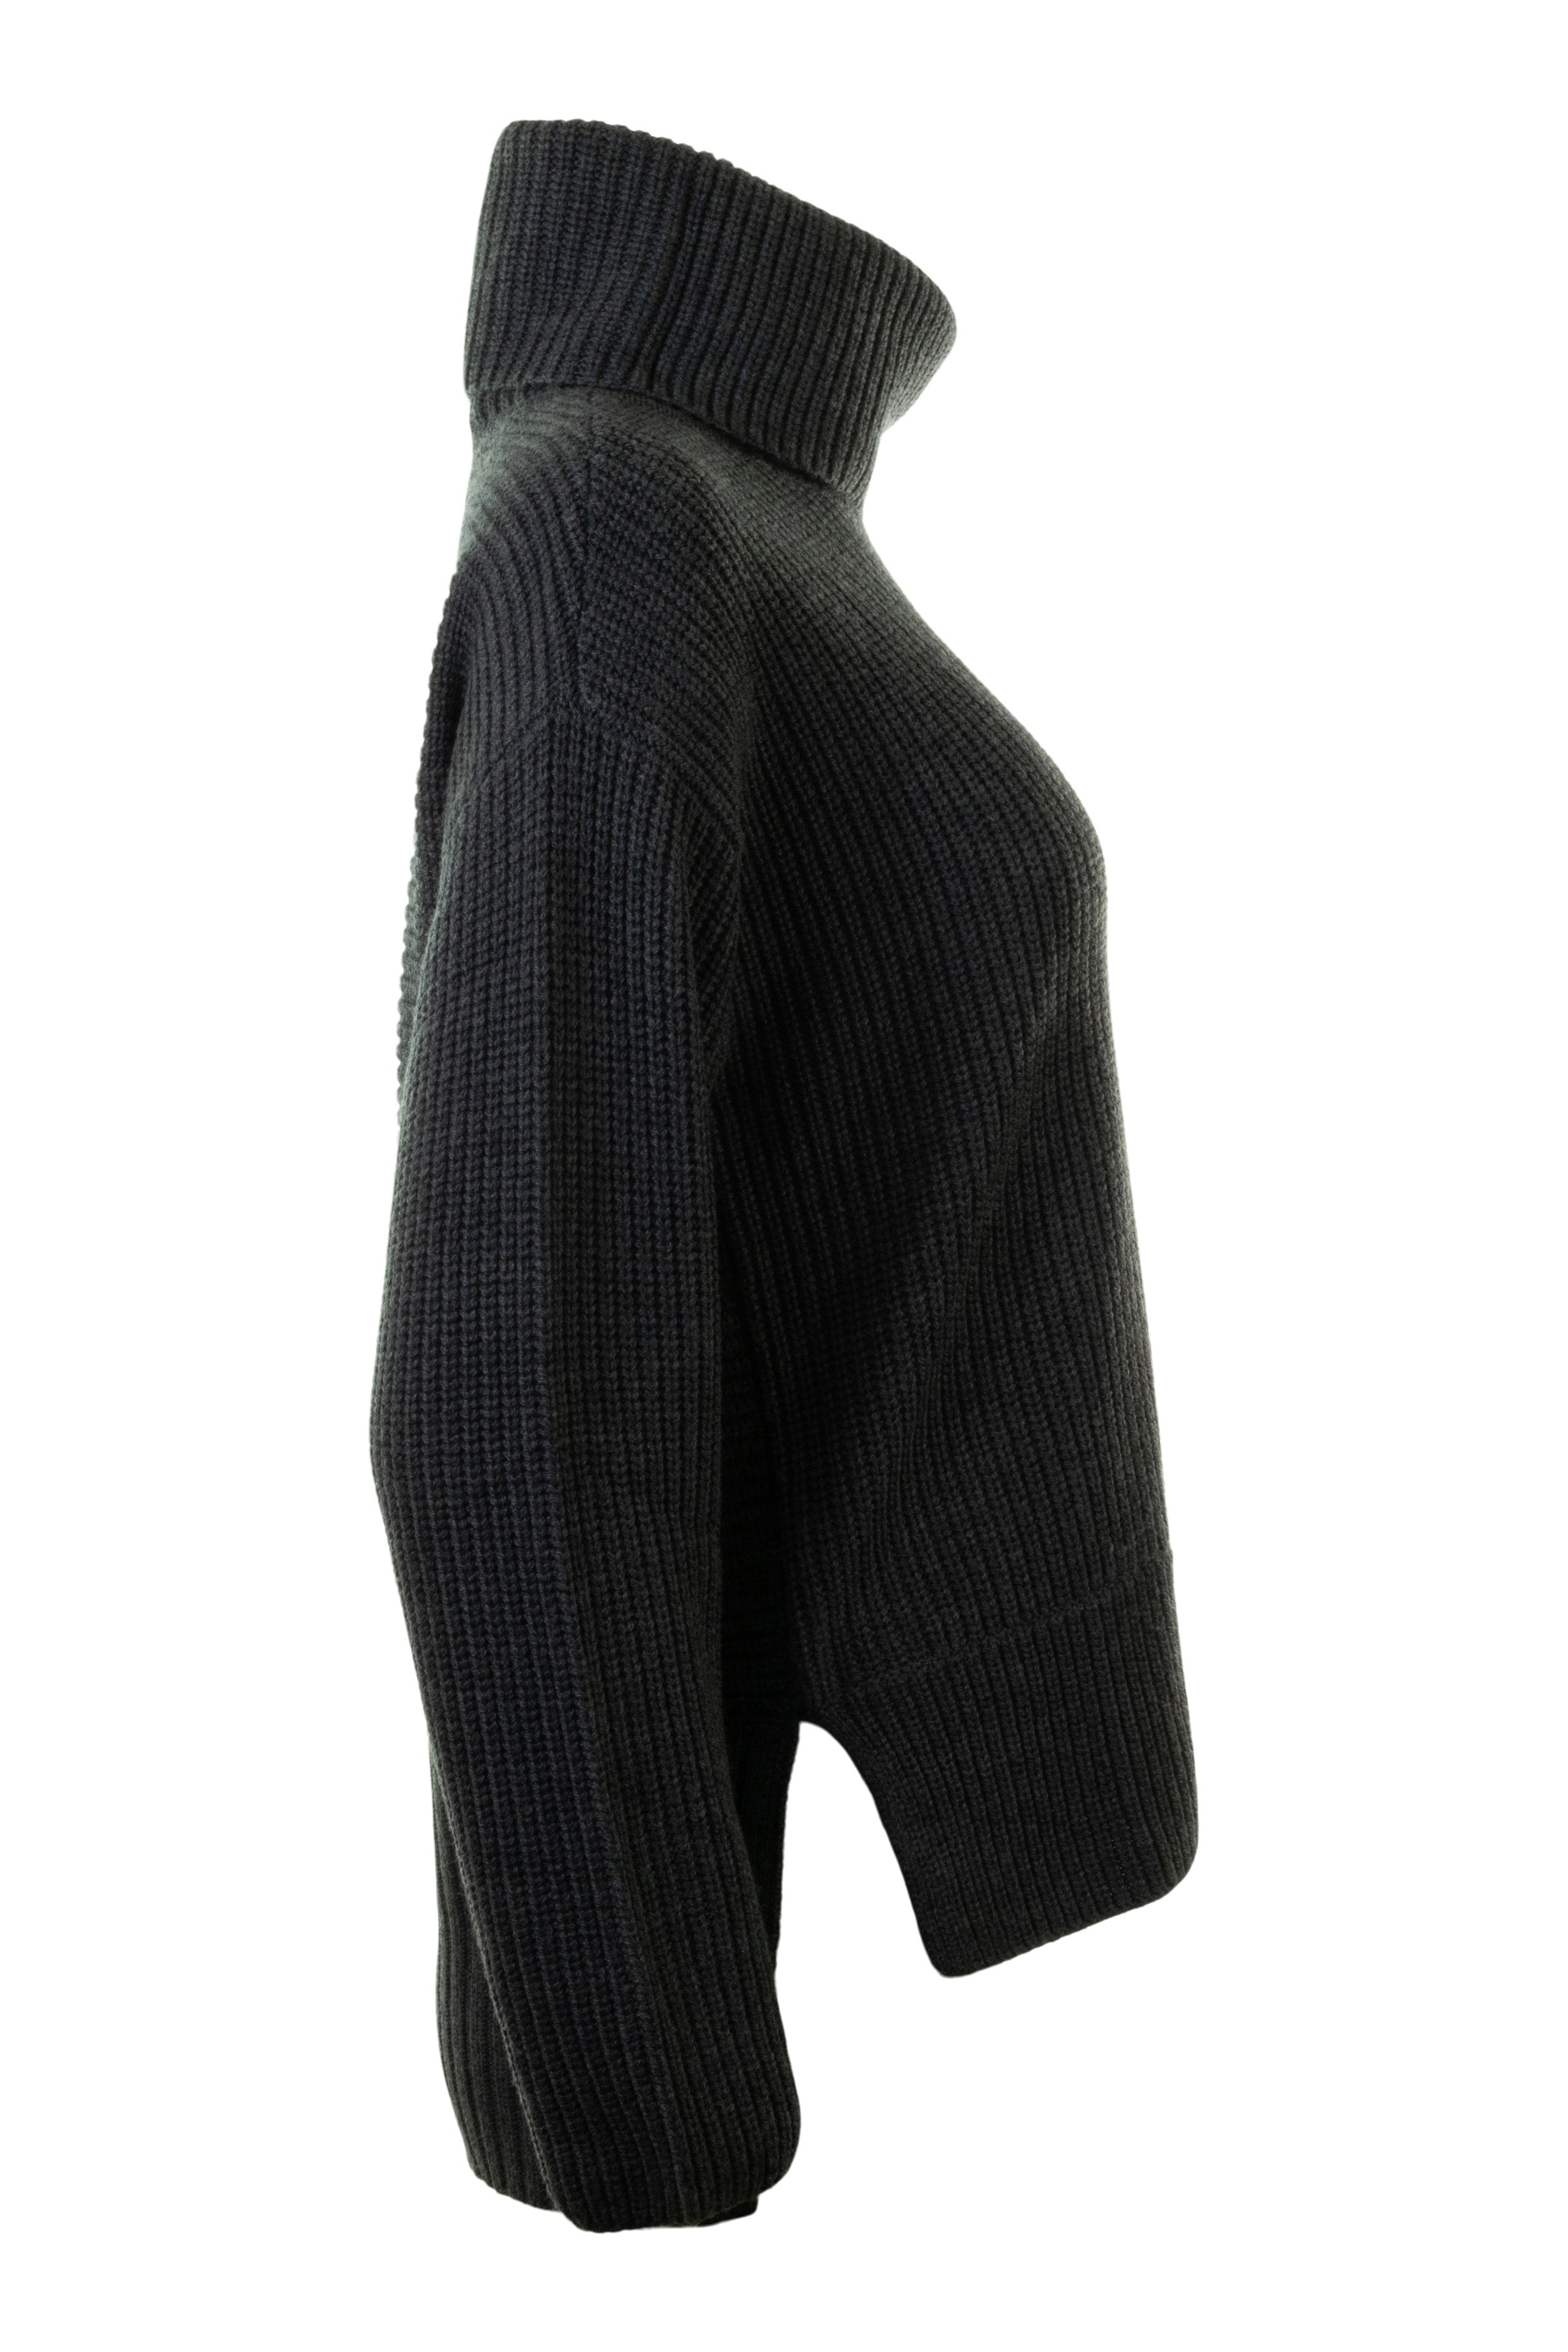 Repeat Cashmere Two Way Textured Turtleneck Sweater in Dark Grey